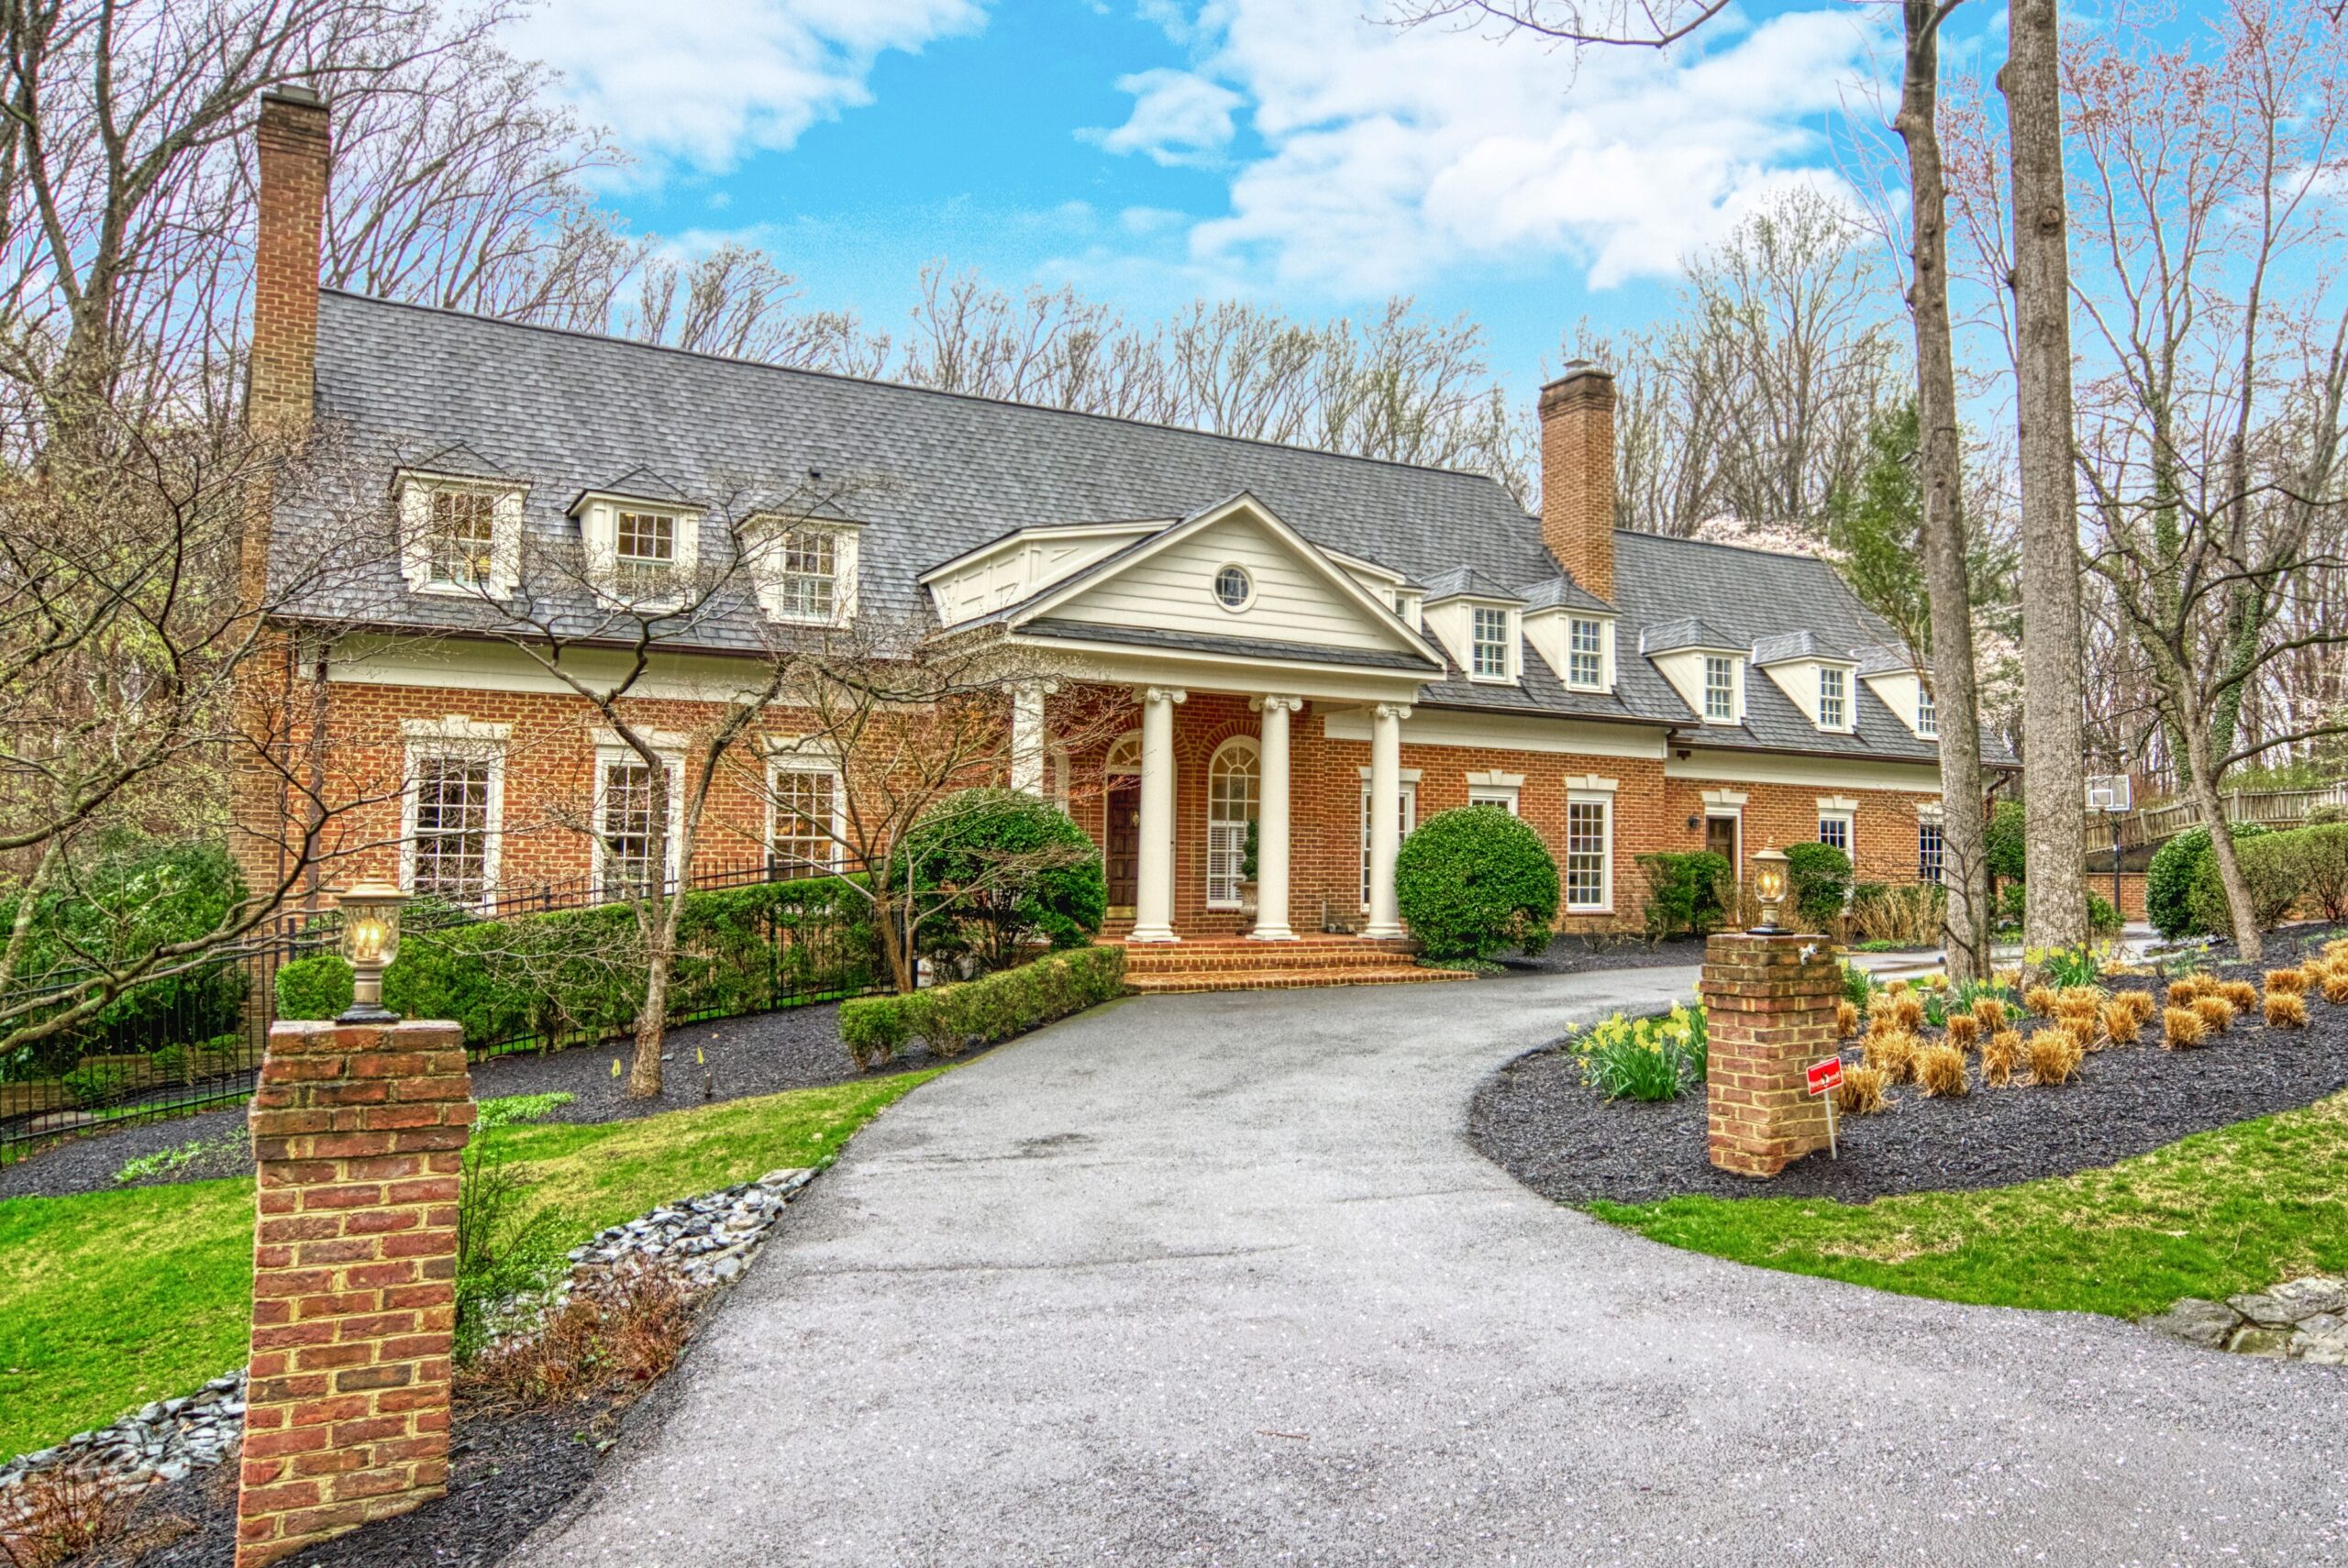 Professional exterior photo of 718 Potomac Knolls Dr - showing the front view from the curb, all-brick home with Georgian columns at the front porch